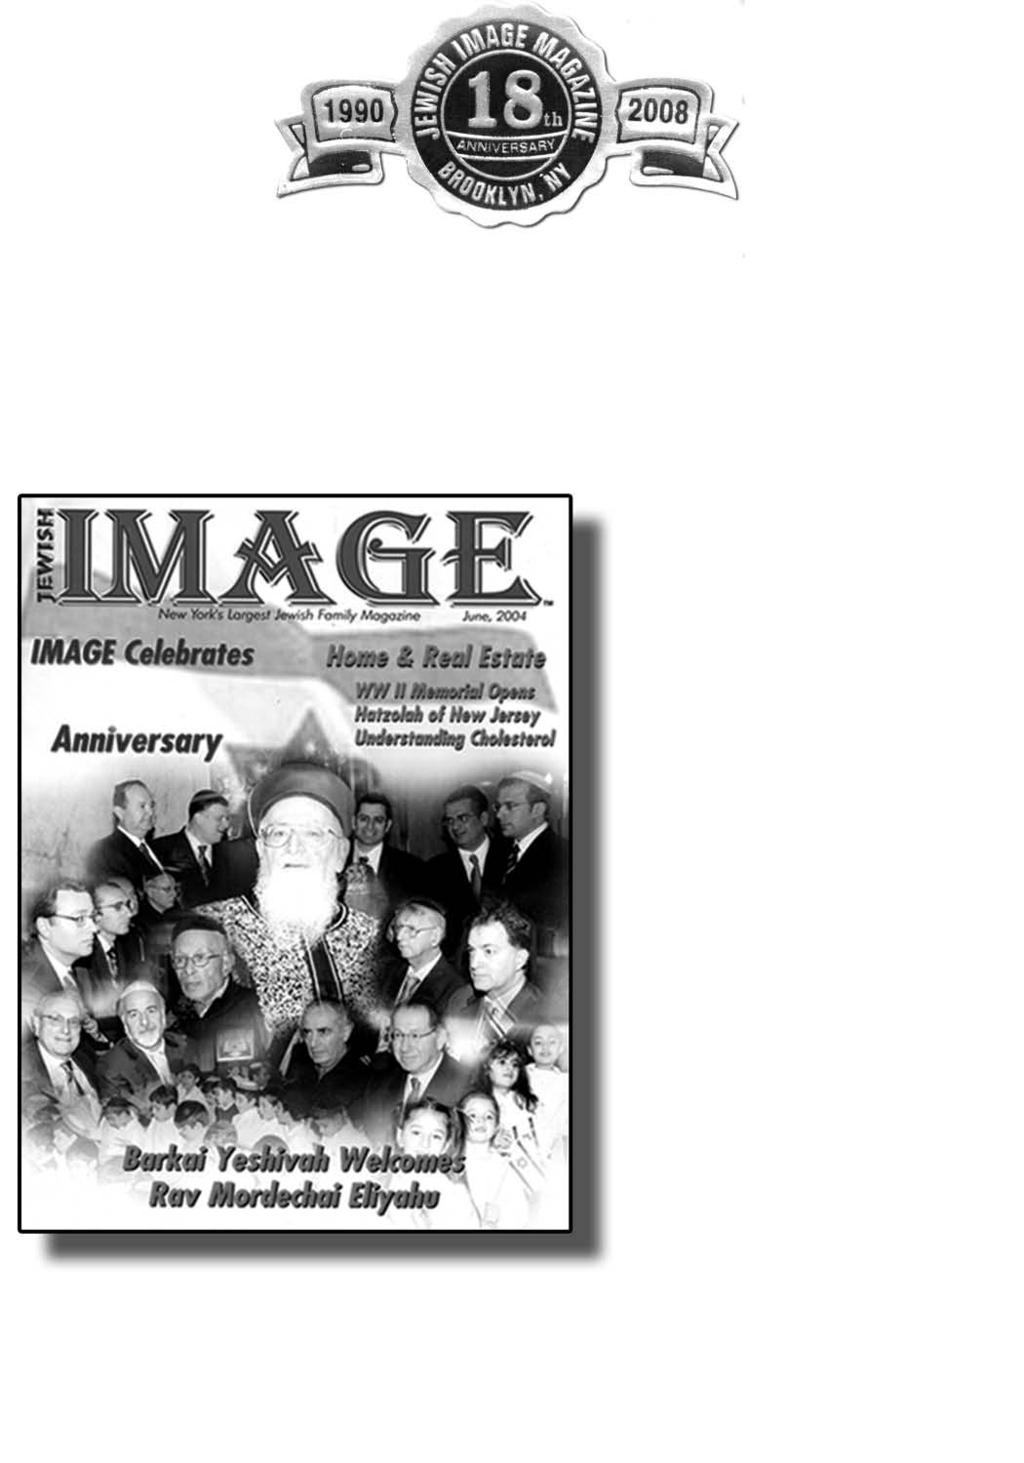 IMAGE MAGAZINE Is Celebrating Its 18th Anniversary in January 2008 Special Commemorative Issue * Everyone in our community is going to keep this special issue forever * Collector s edition *